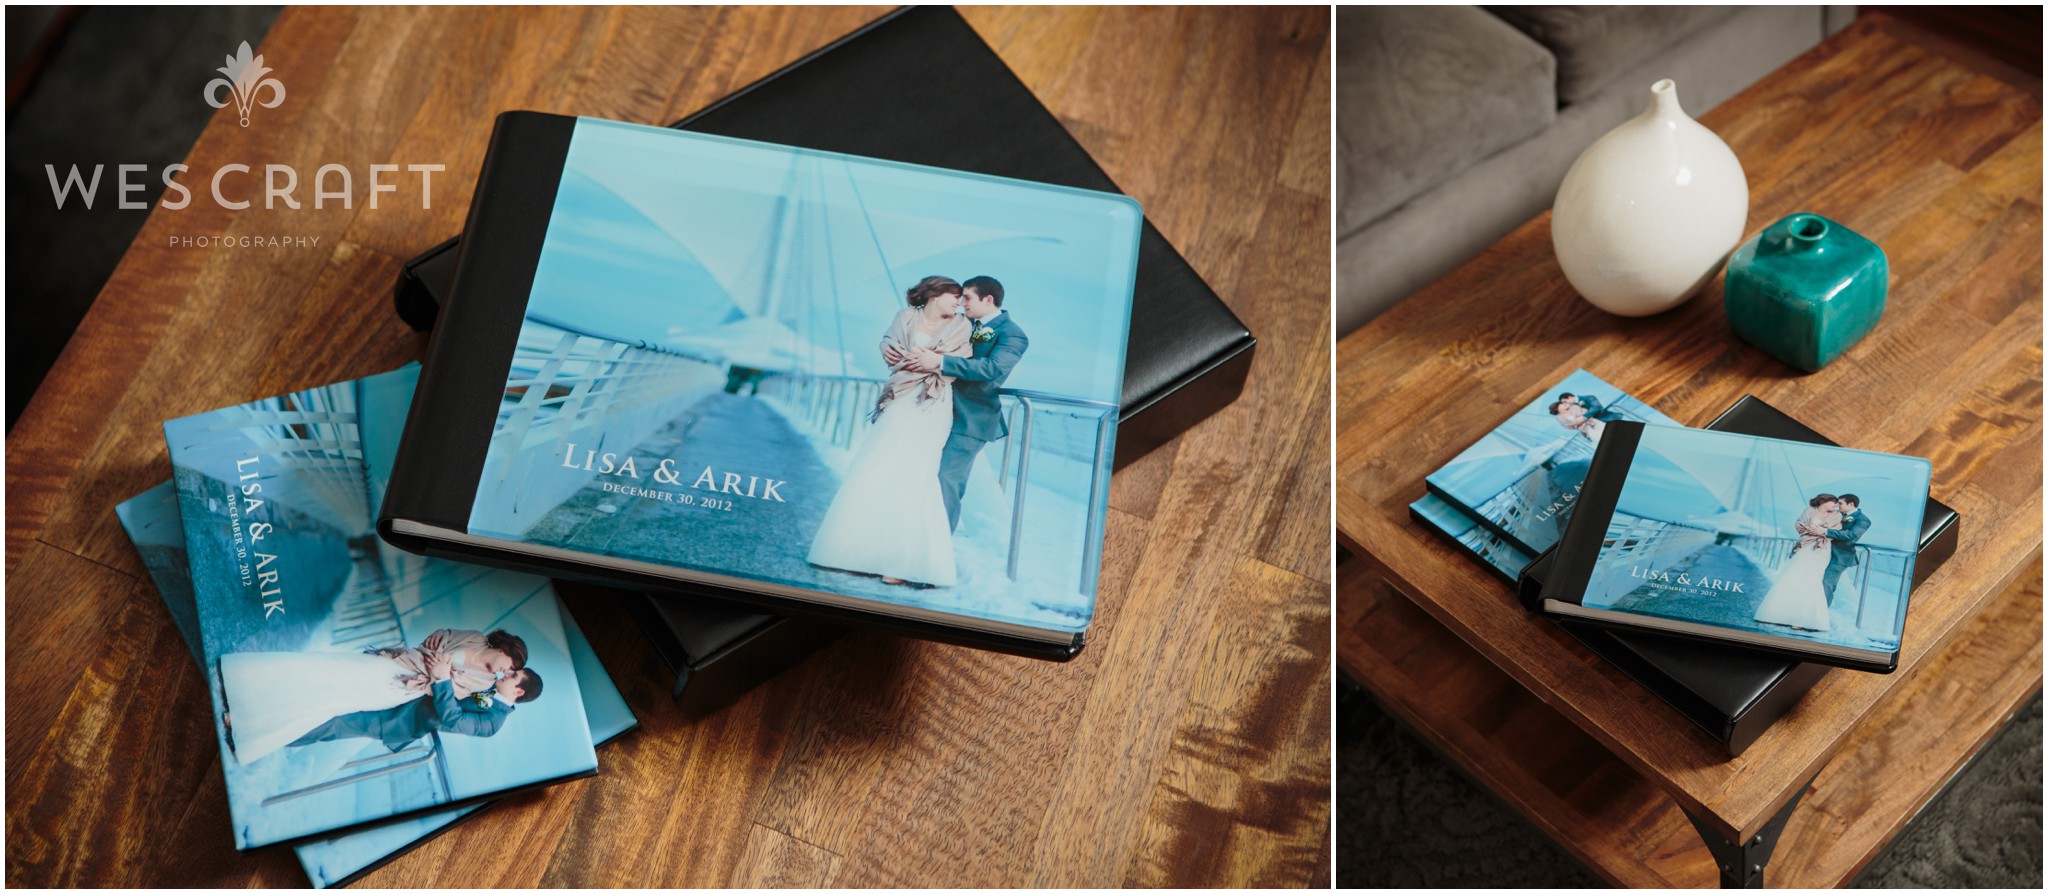 This winter wedding made for some dramatic snow day photography in Milwaukee.  Why not feature a romantic landscape on the cover with an acrylic print? 